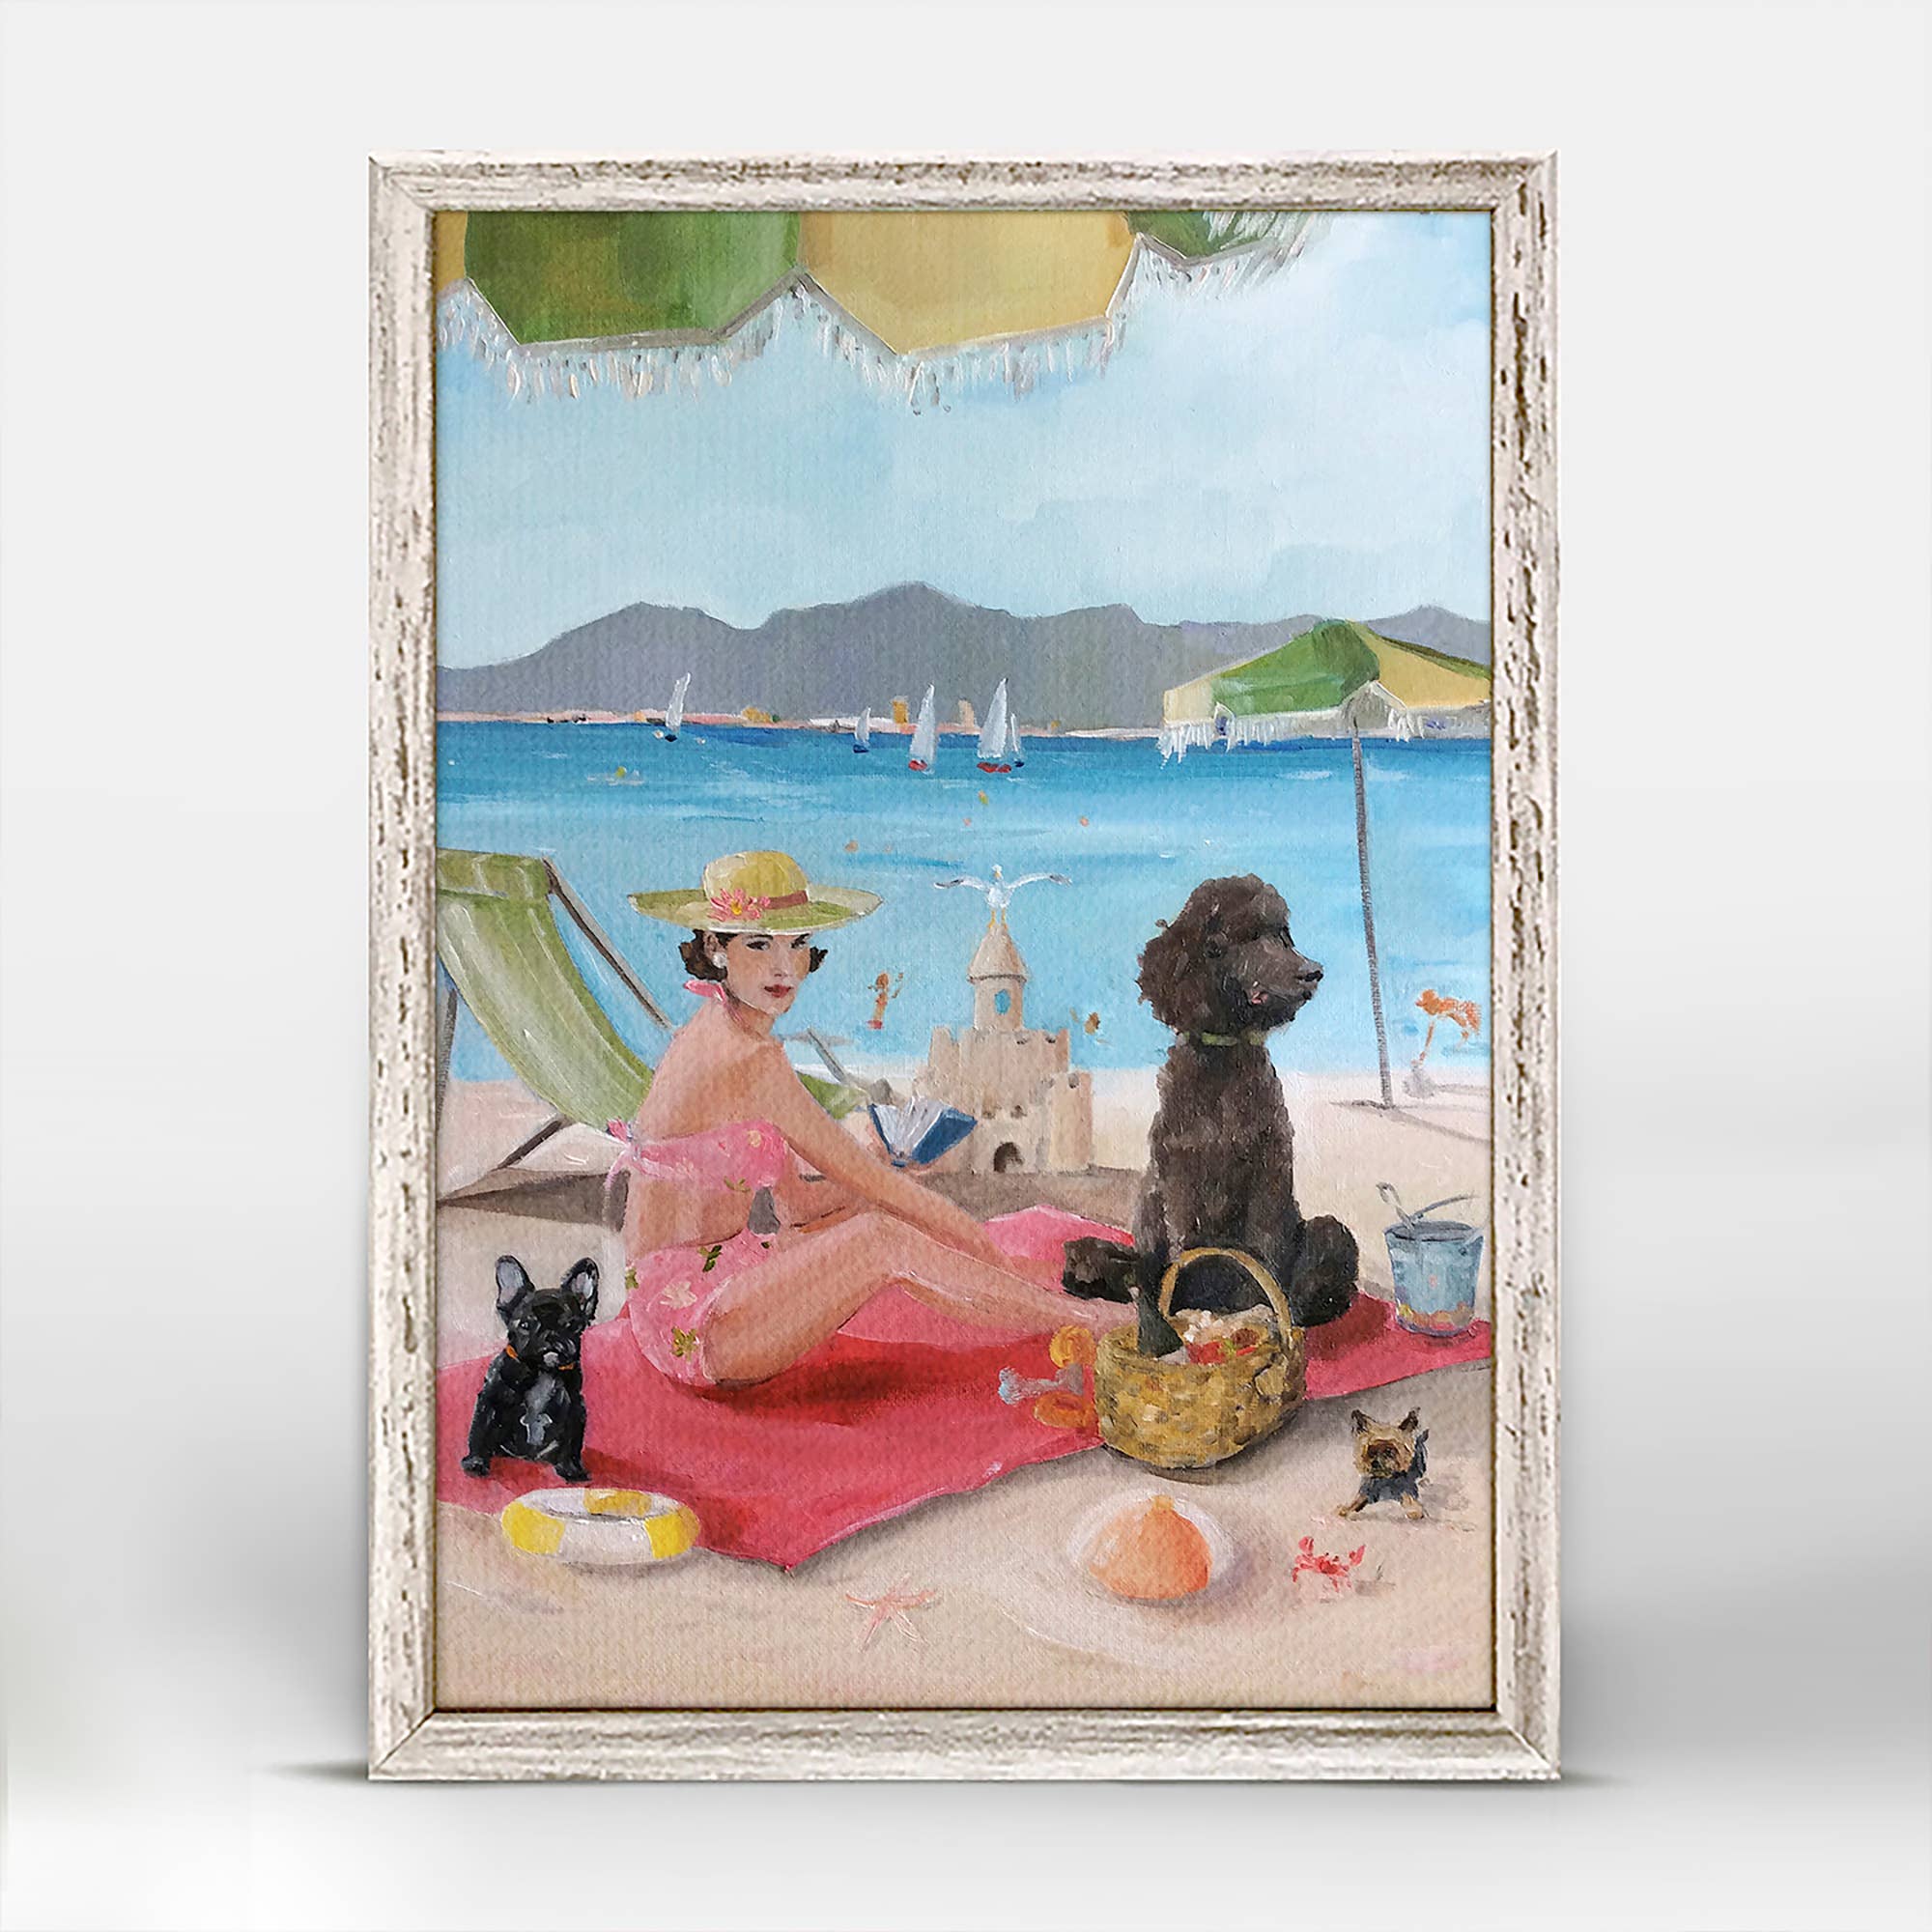 A Day In St. Tropez Mini Framed Canvas - 5" x 7"